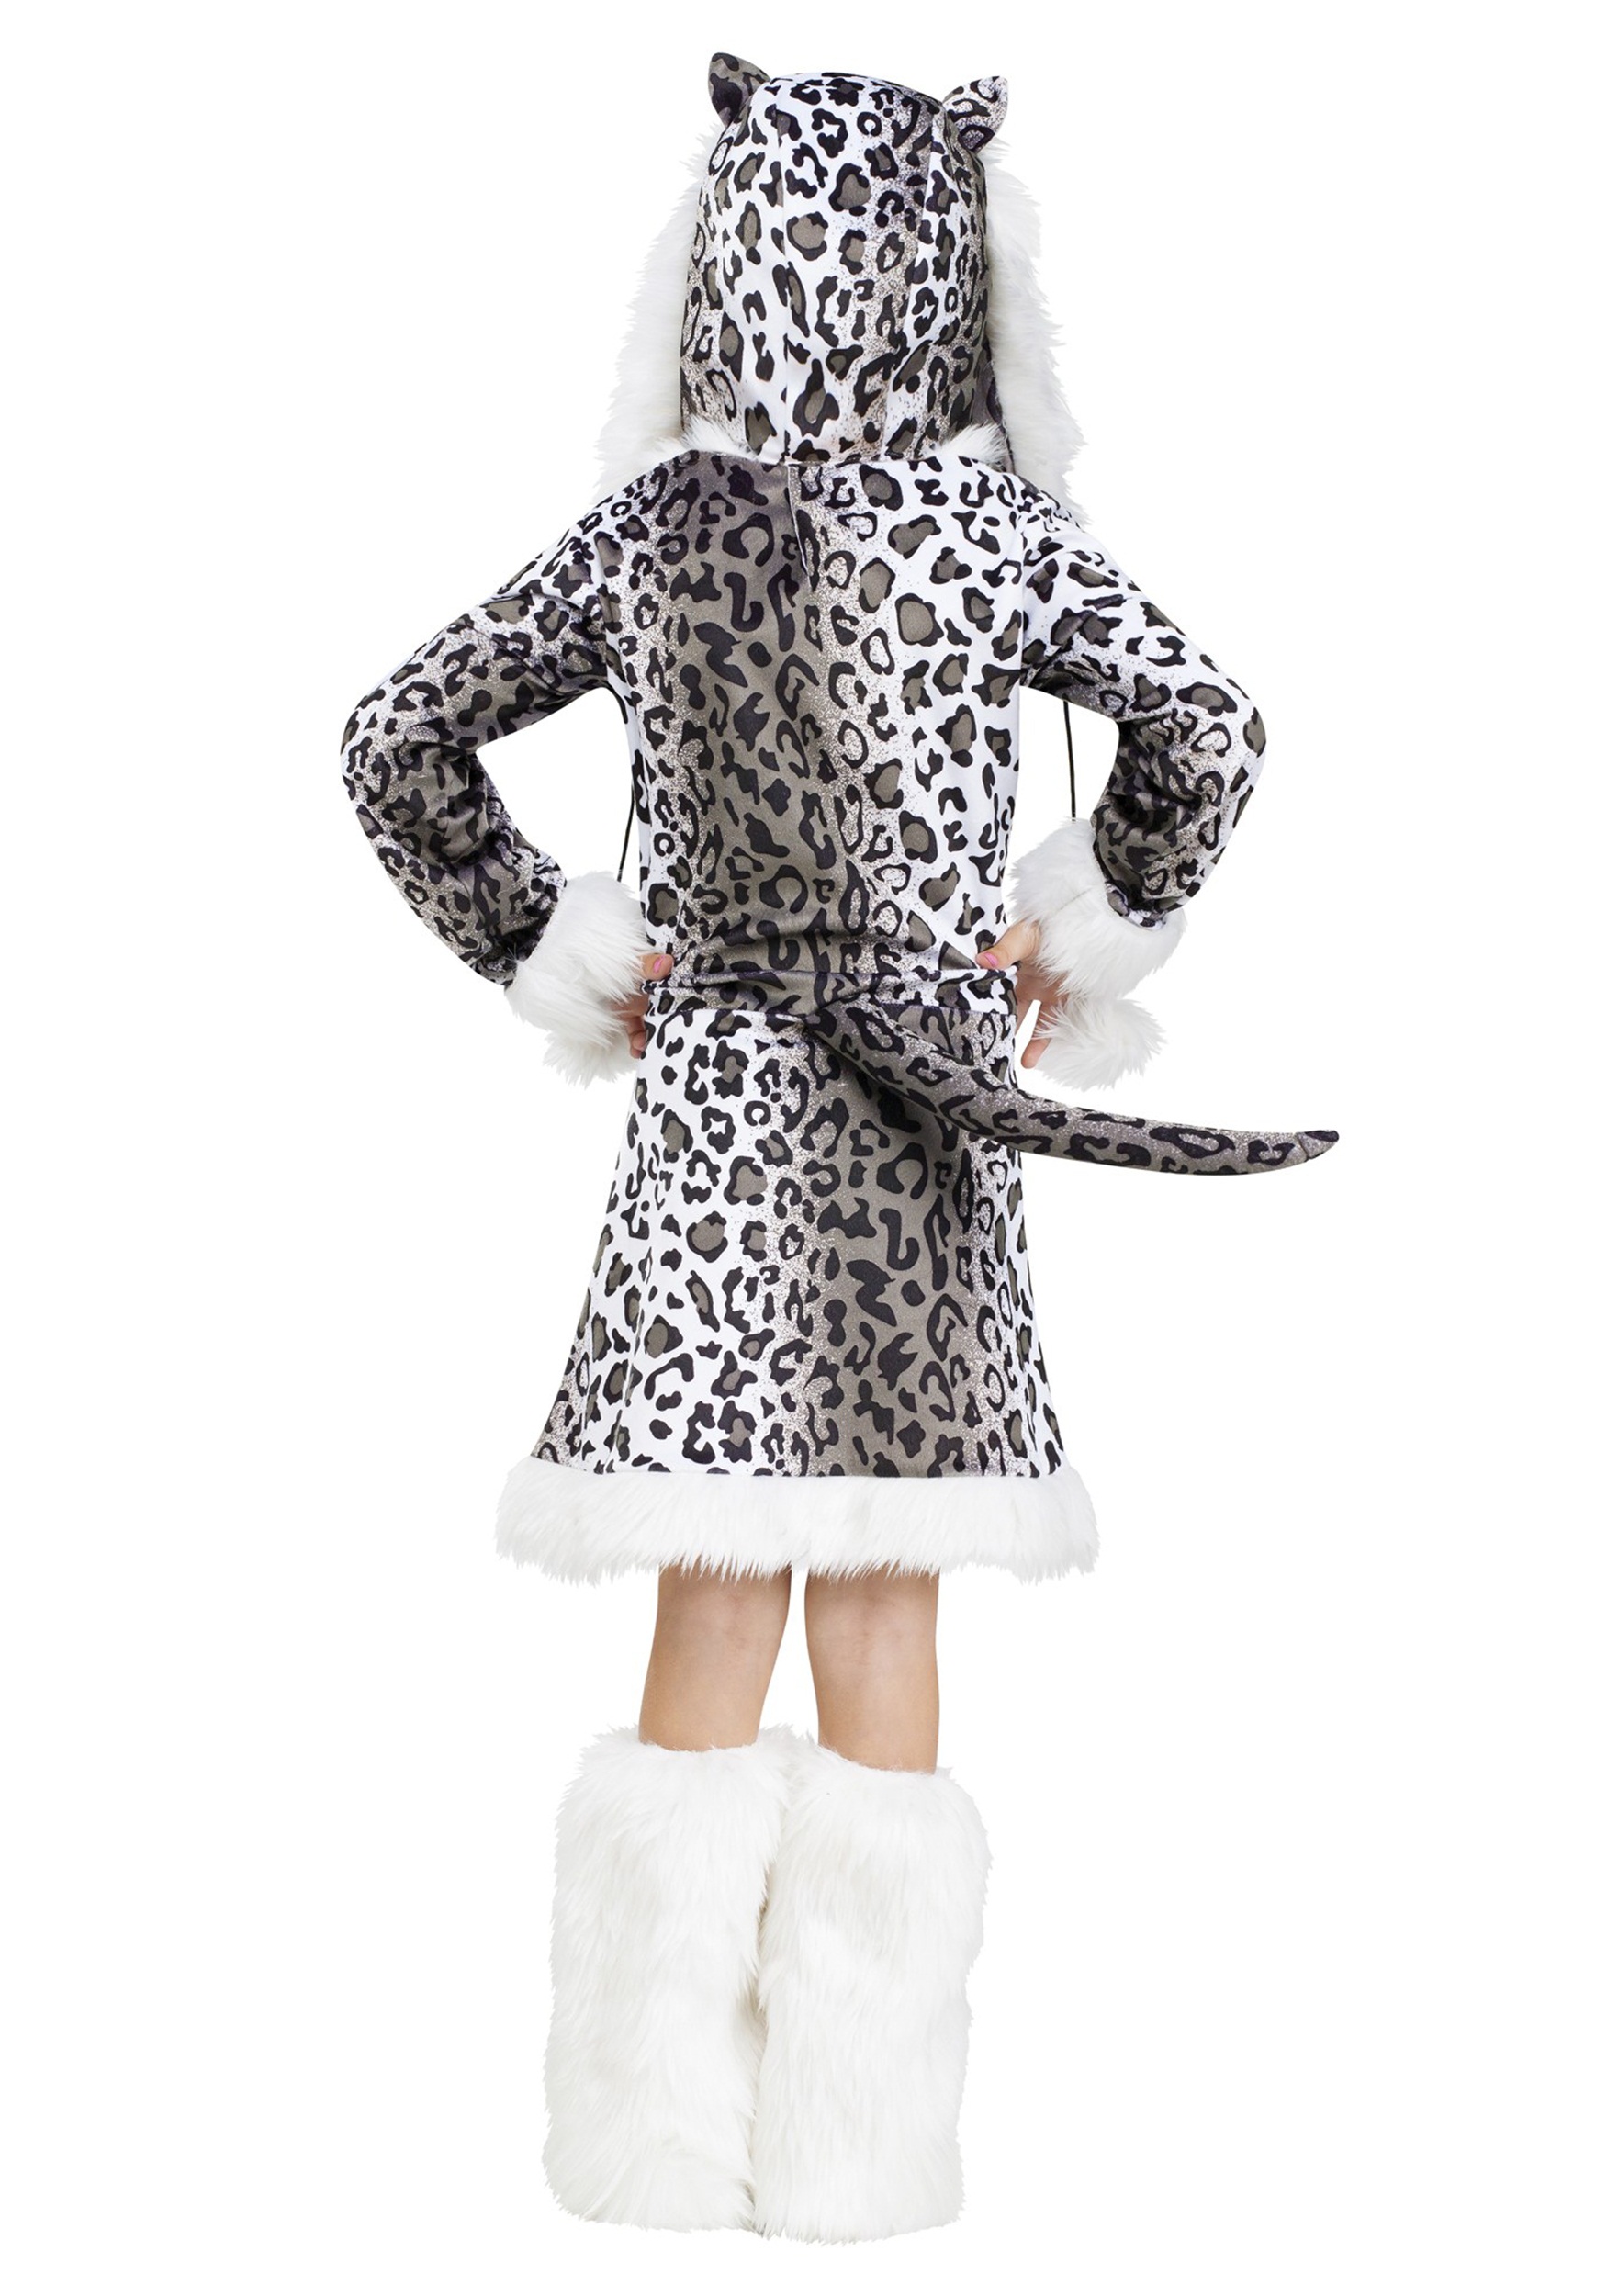 Snow Leopard Costume For Girls